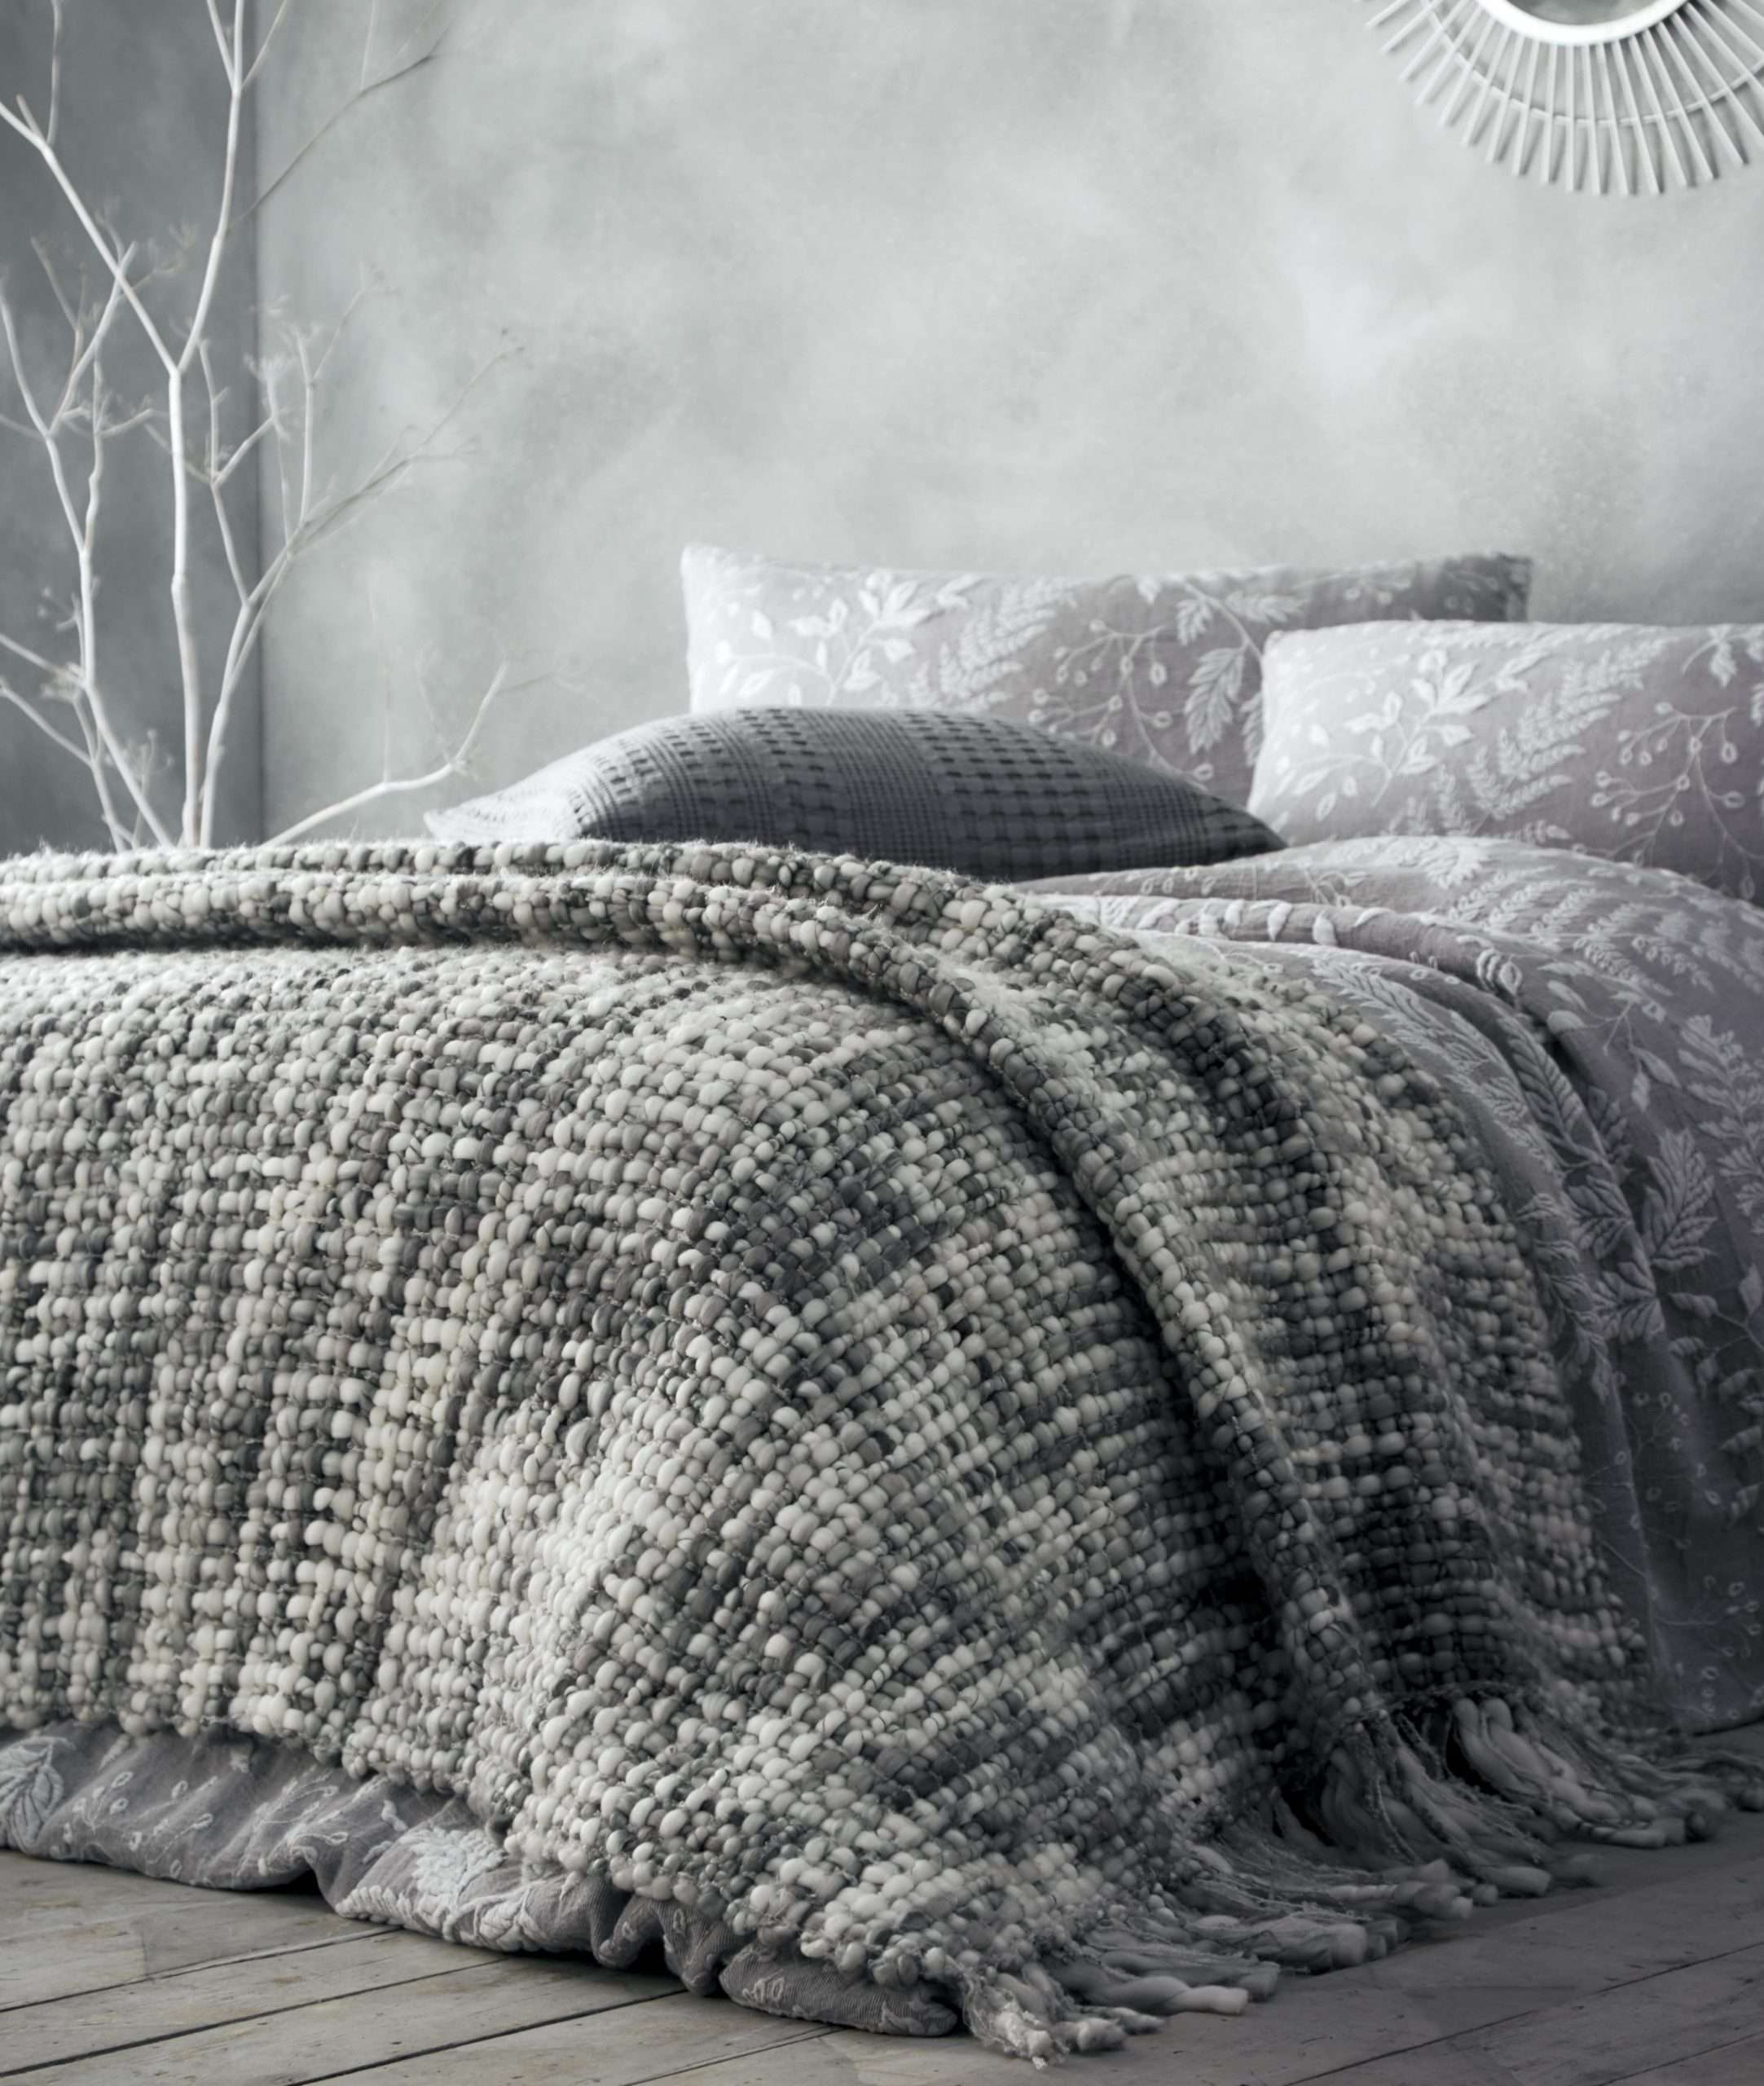 PALAZZO WITH GREY MARLEY THROW min scaled